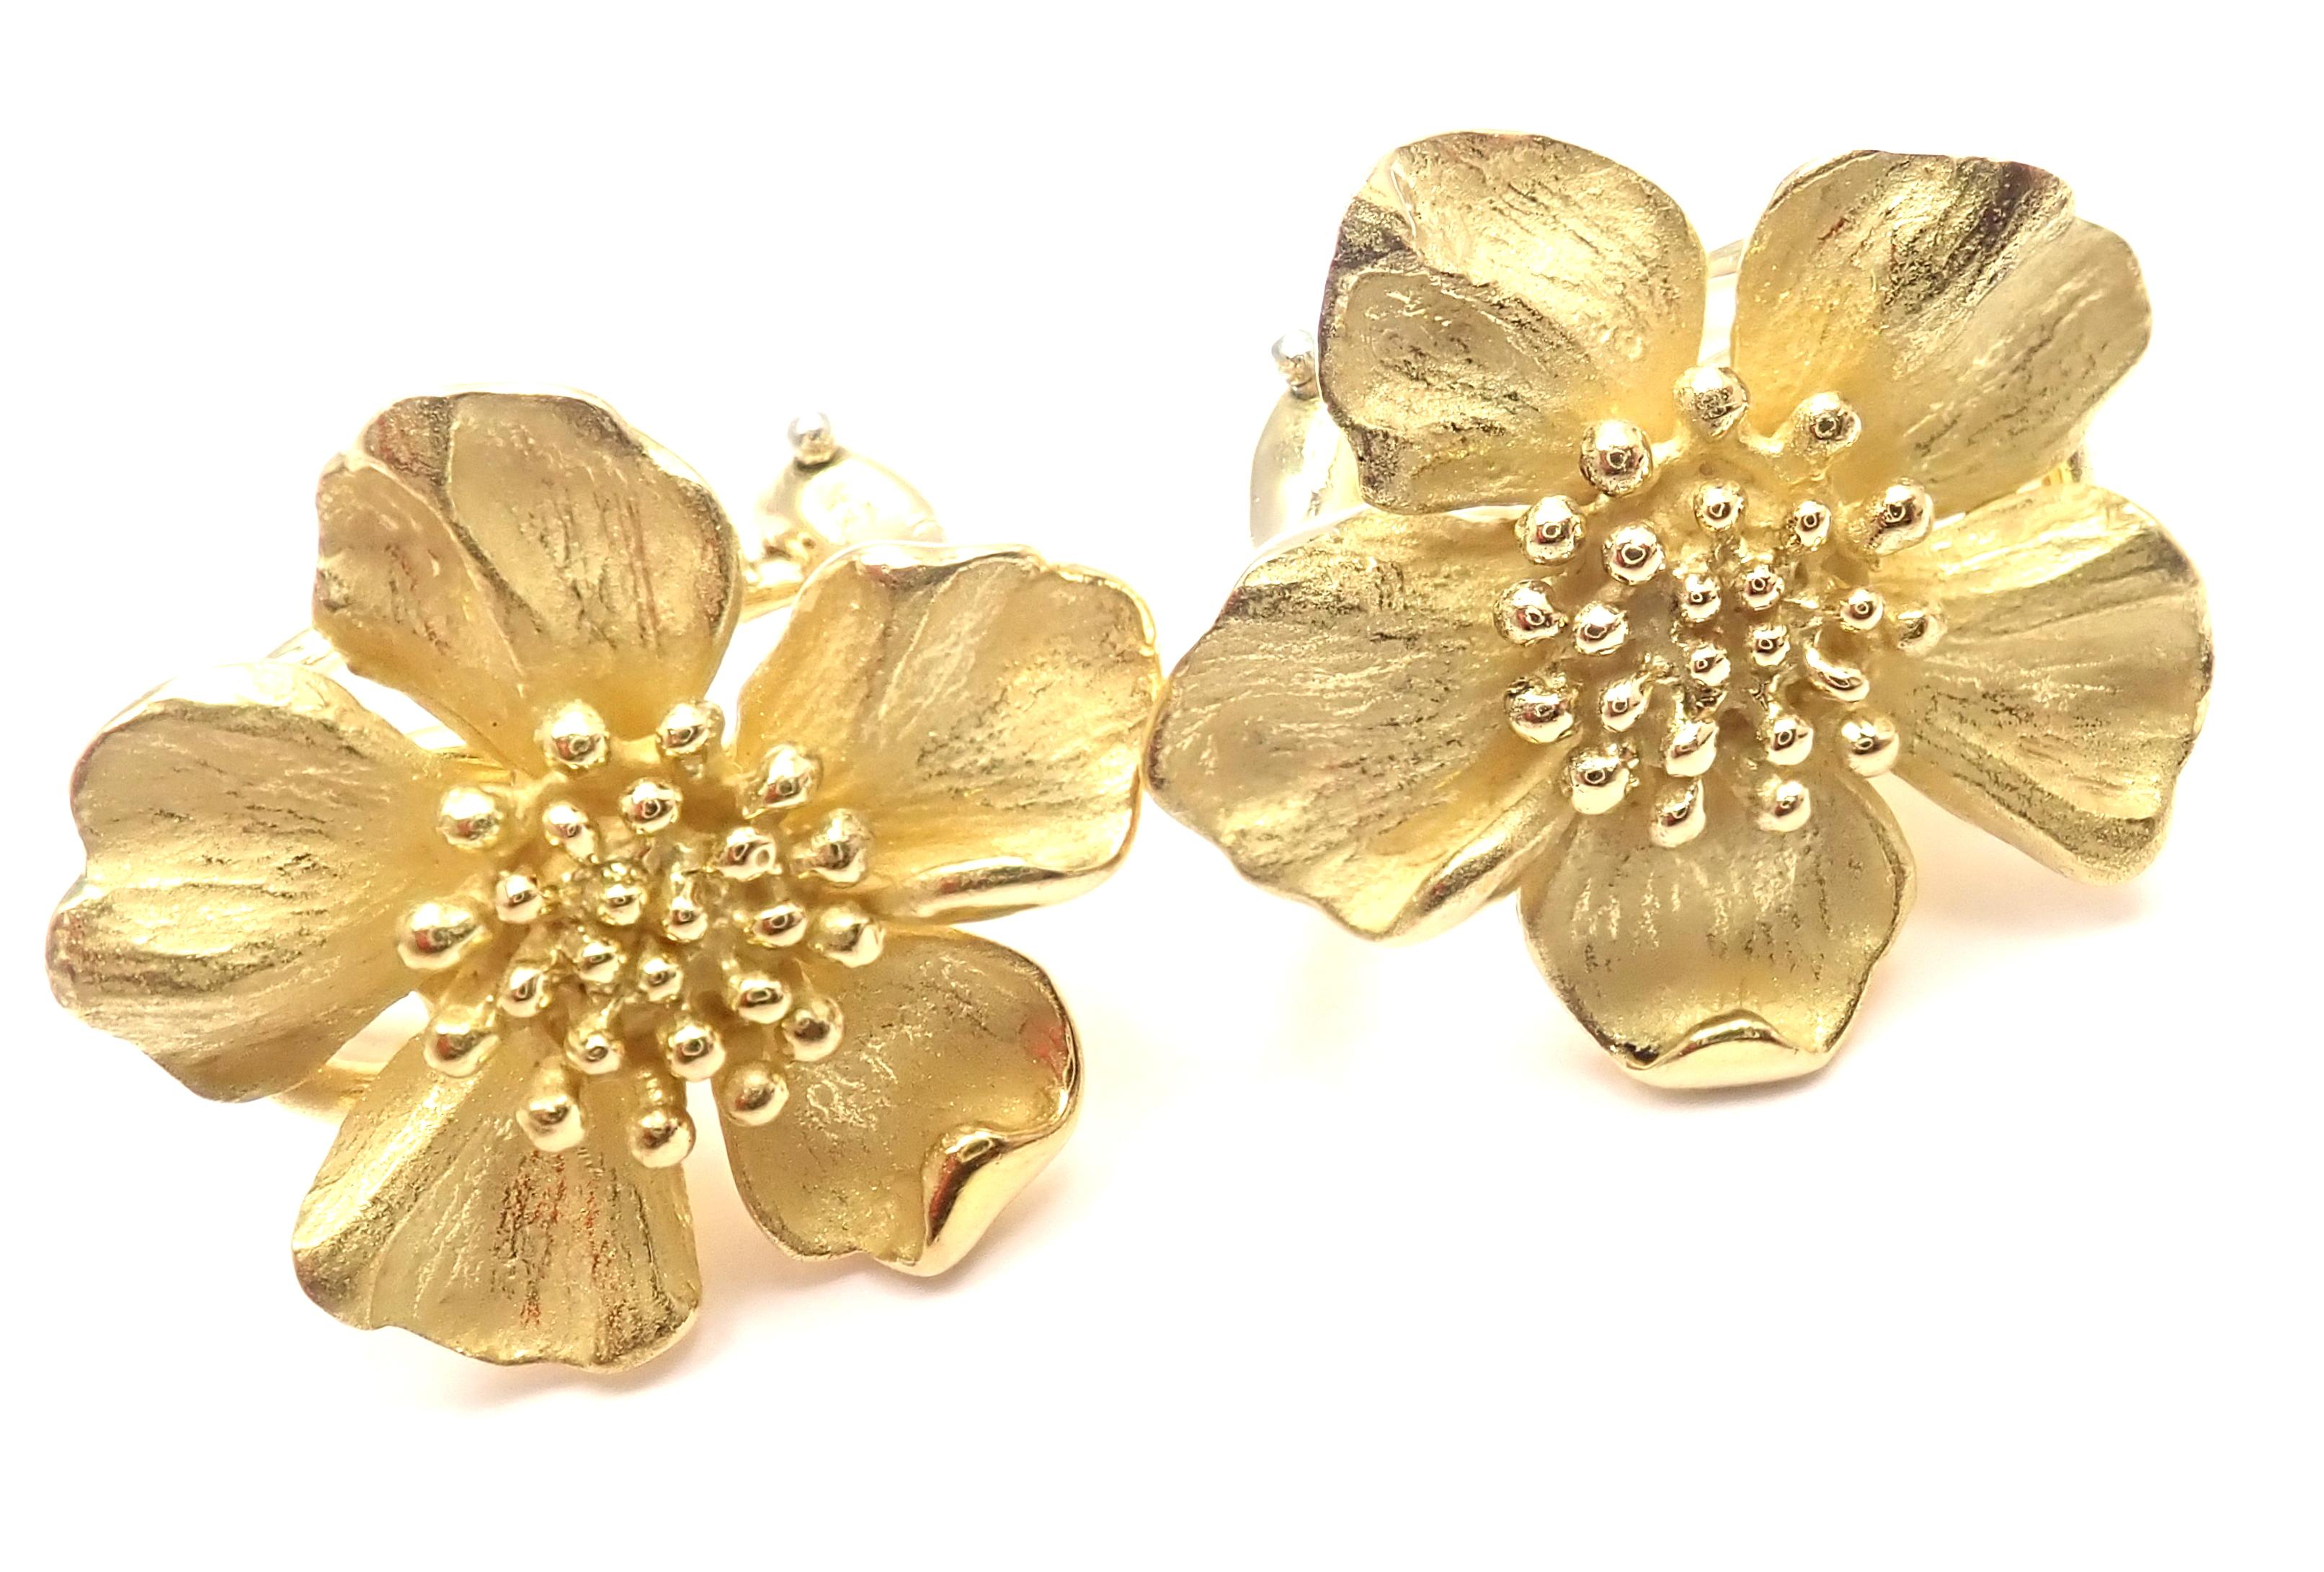 18k Yellow Gold Dogwood Wild Rose Flower Earrings by Tiffany & Co.
These earrings are made for not pierced ears, but can be converted by adding posts.
Details:
Weight: 10.2 grams
Dimensions: 17mm
Stamped Hallmarks: T & Co 750
*Free Shipping within